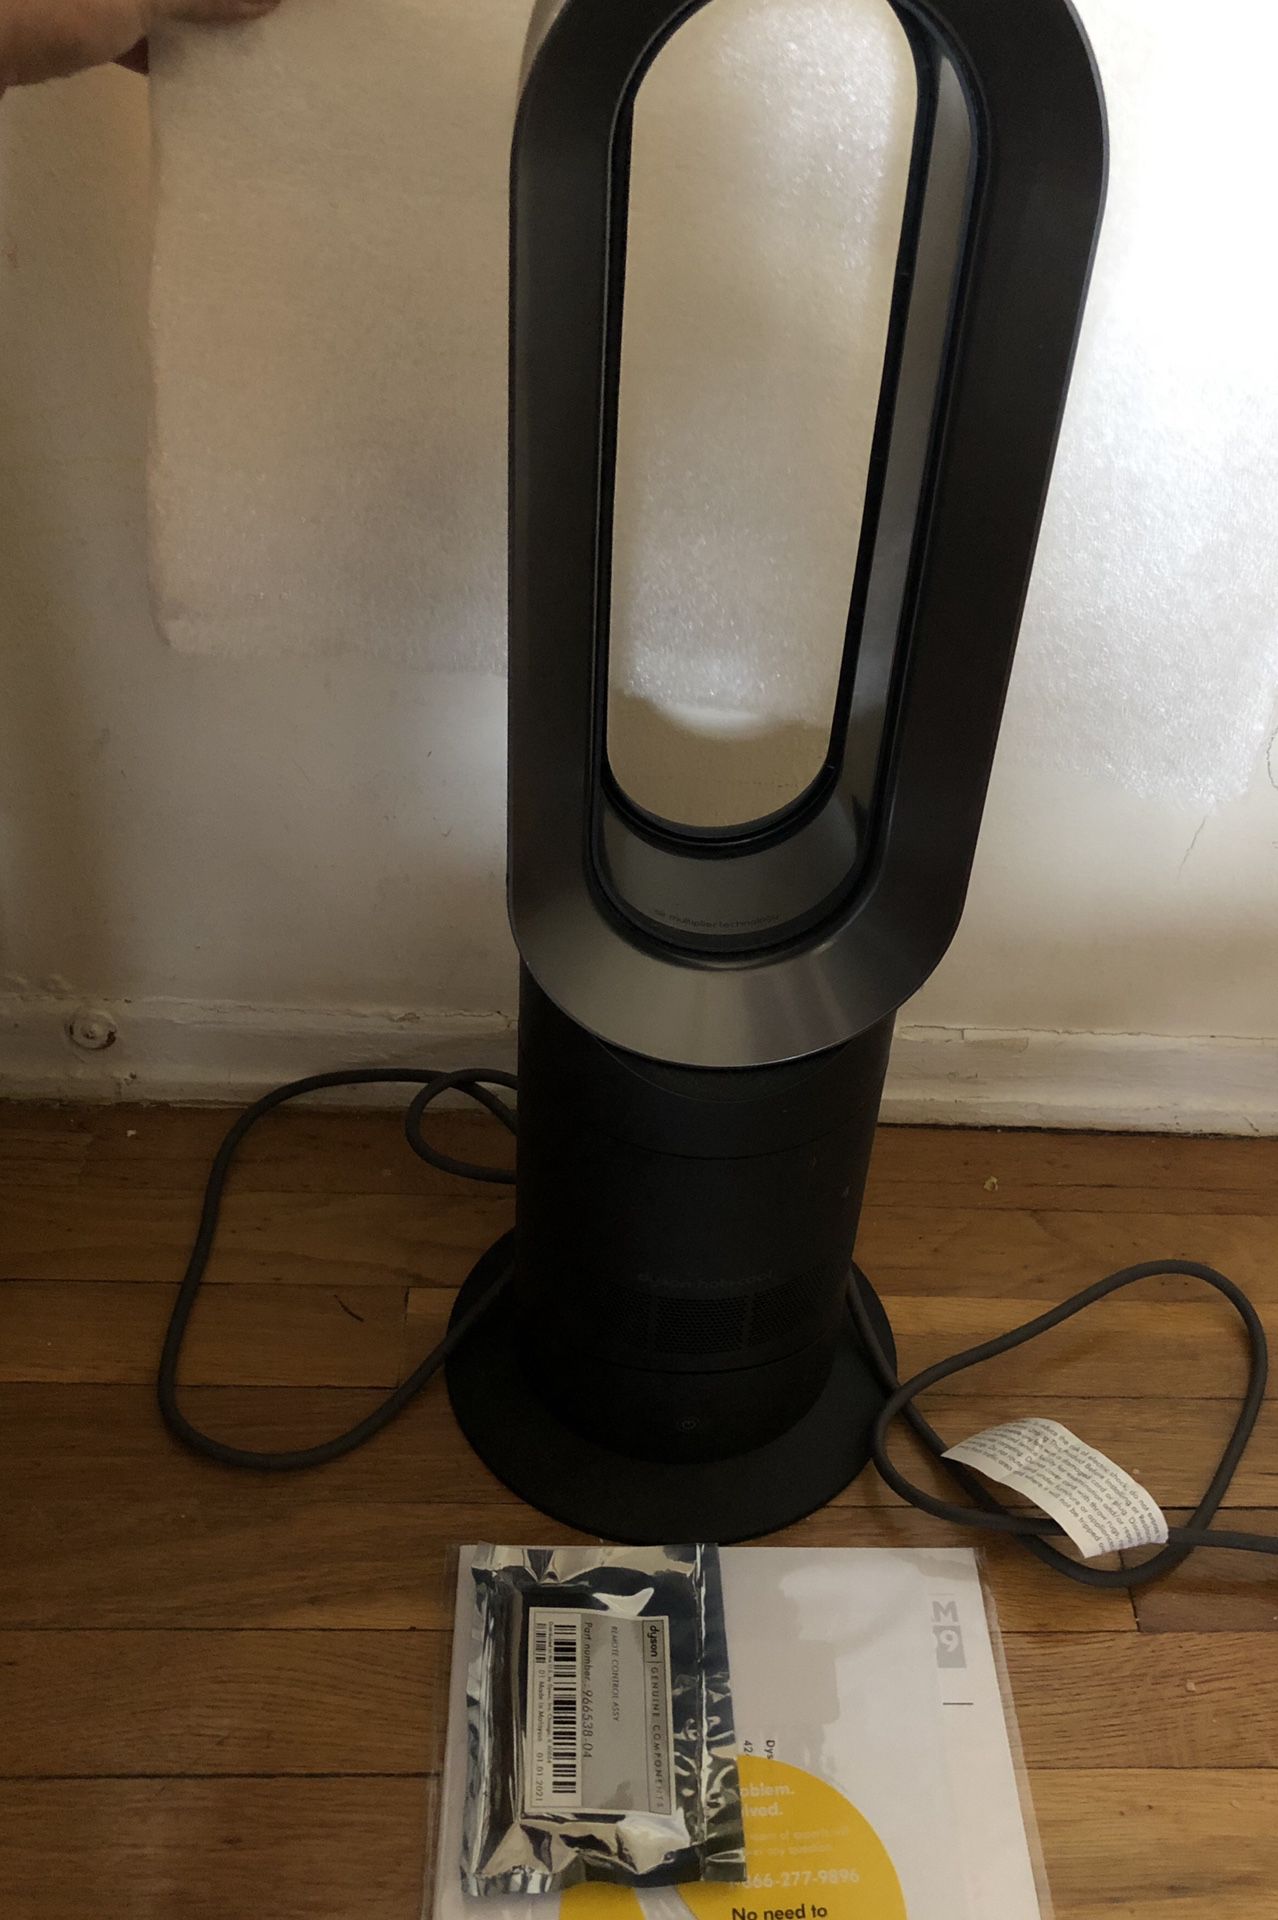 Dyson Hot+Cool Air Multiplier, Jet Focus Fan Heater black/silver - AM09  In very good condition , working perfect  Will ship in non-retail box.  Comes